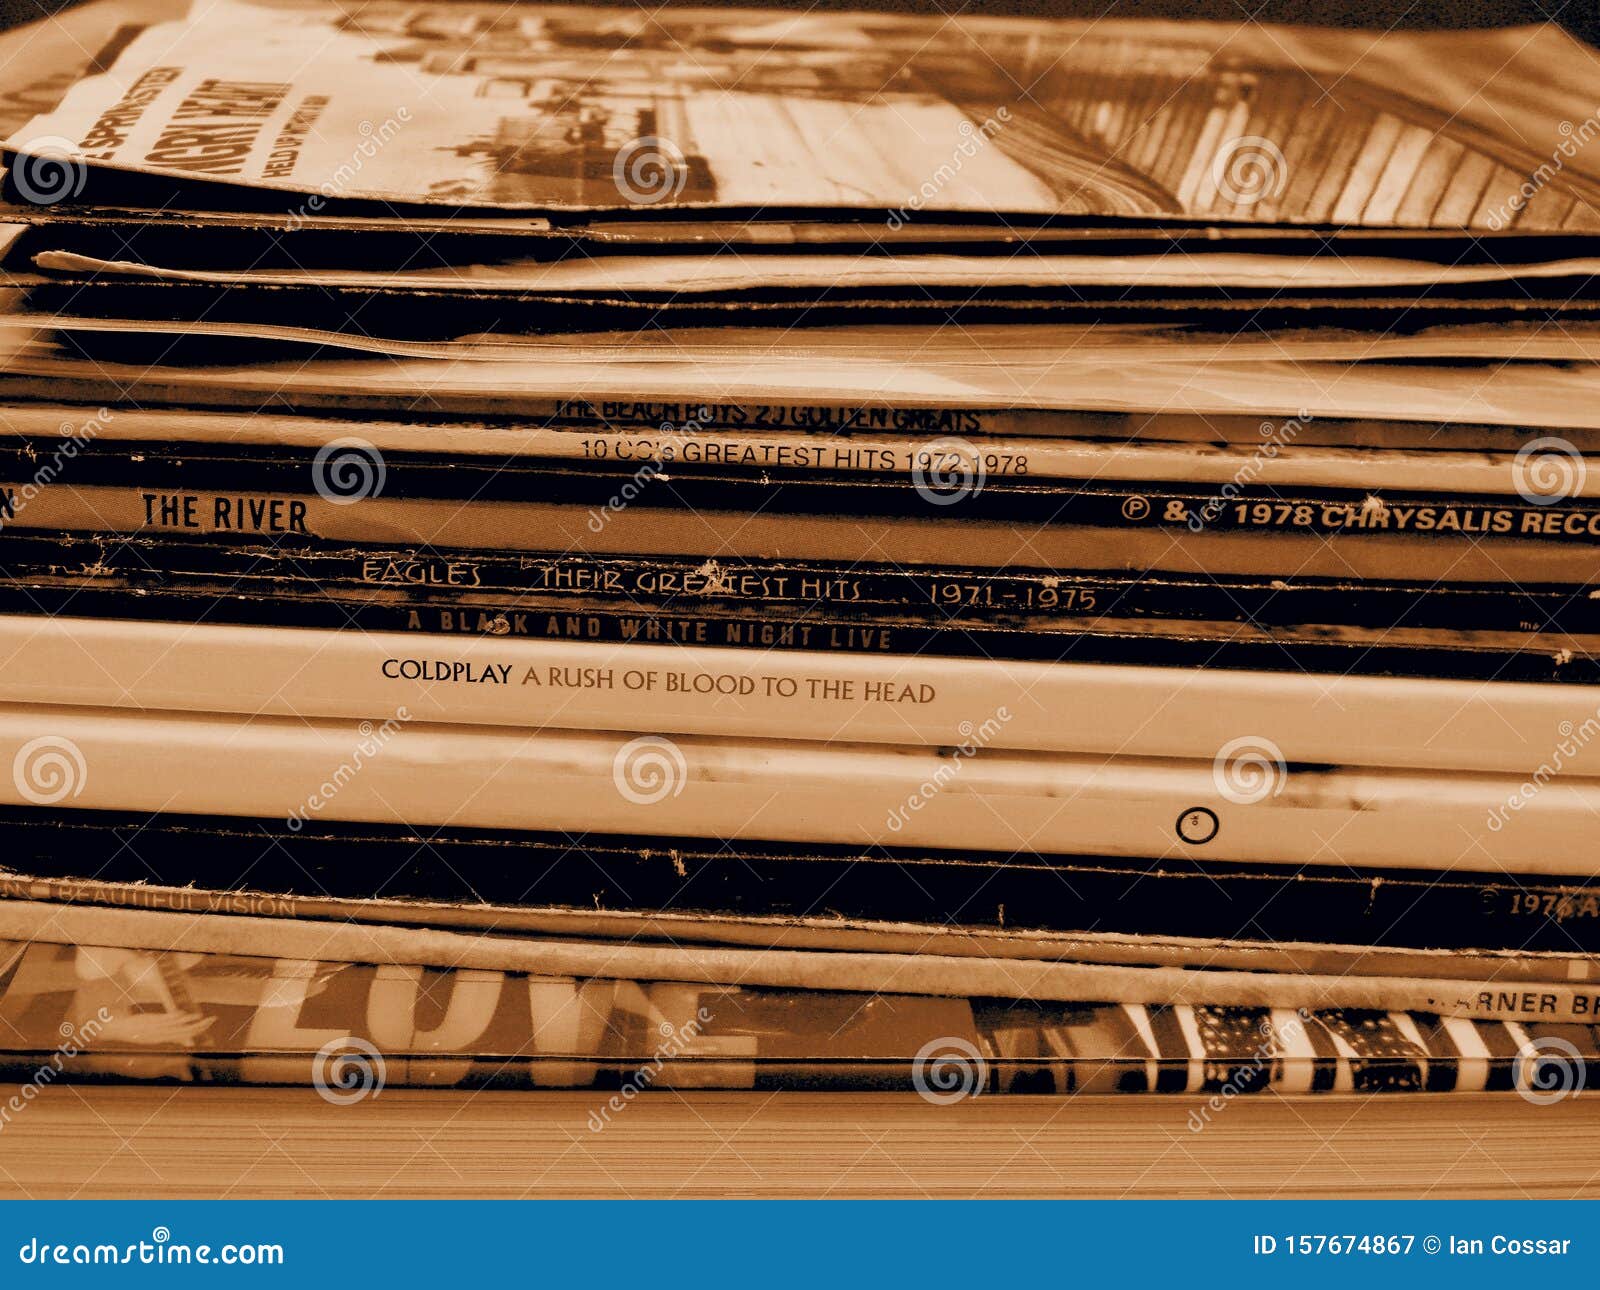 Stack Of Vinyl Lp Albums Editorial Photography Image Of Vinyl 157674867